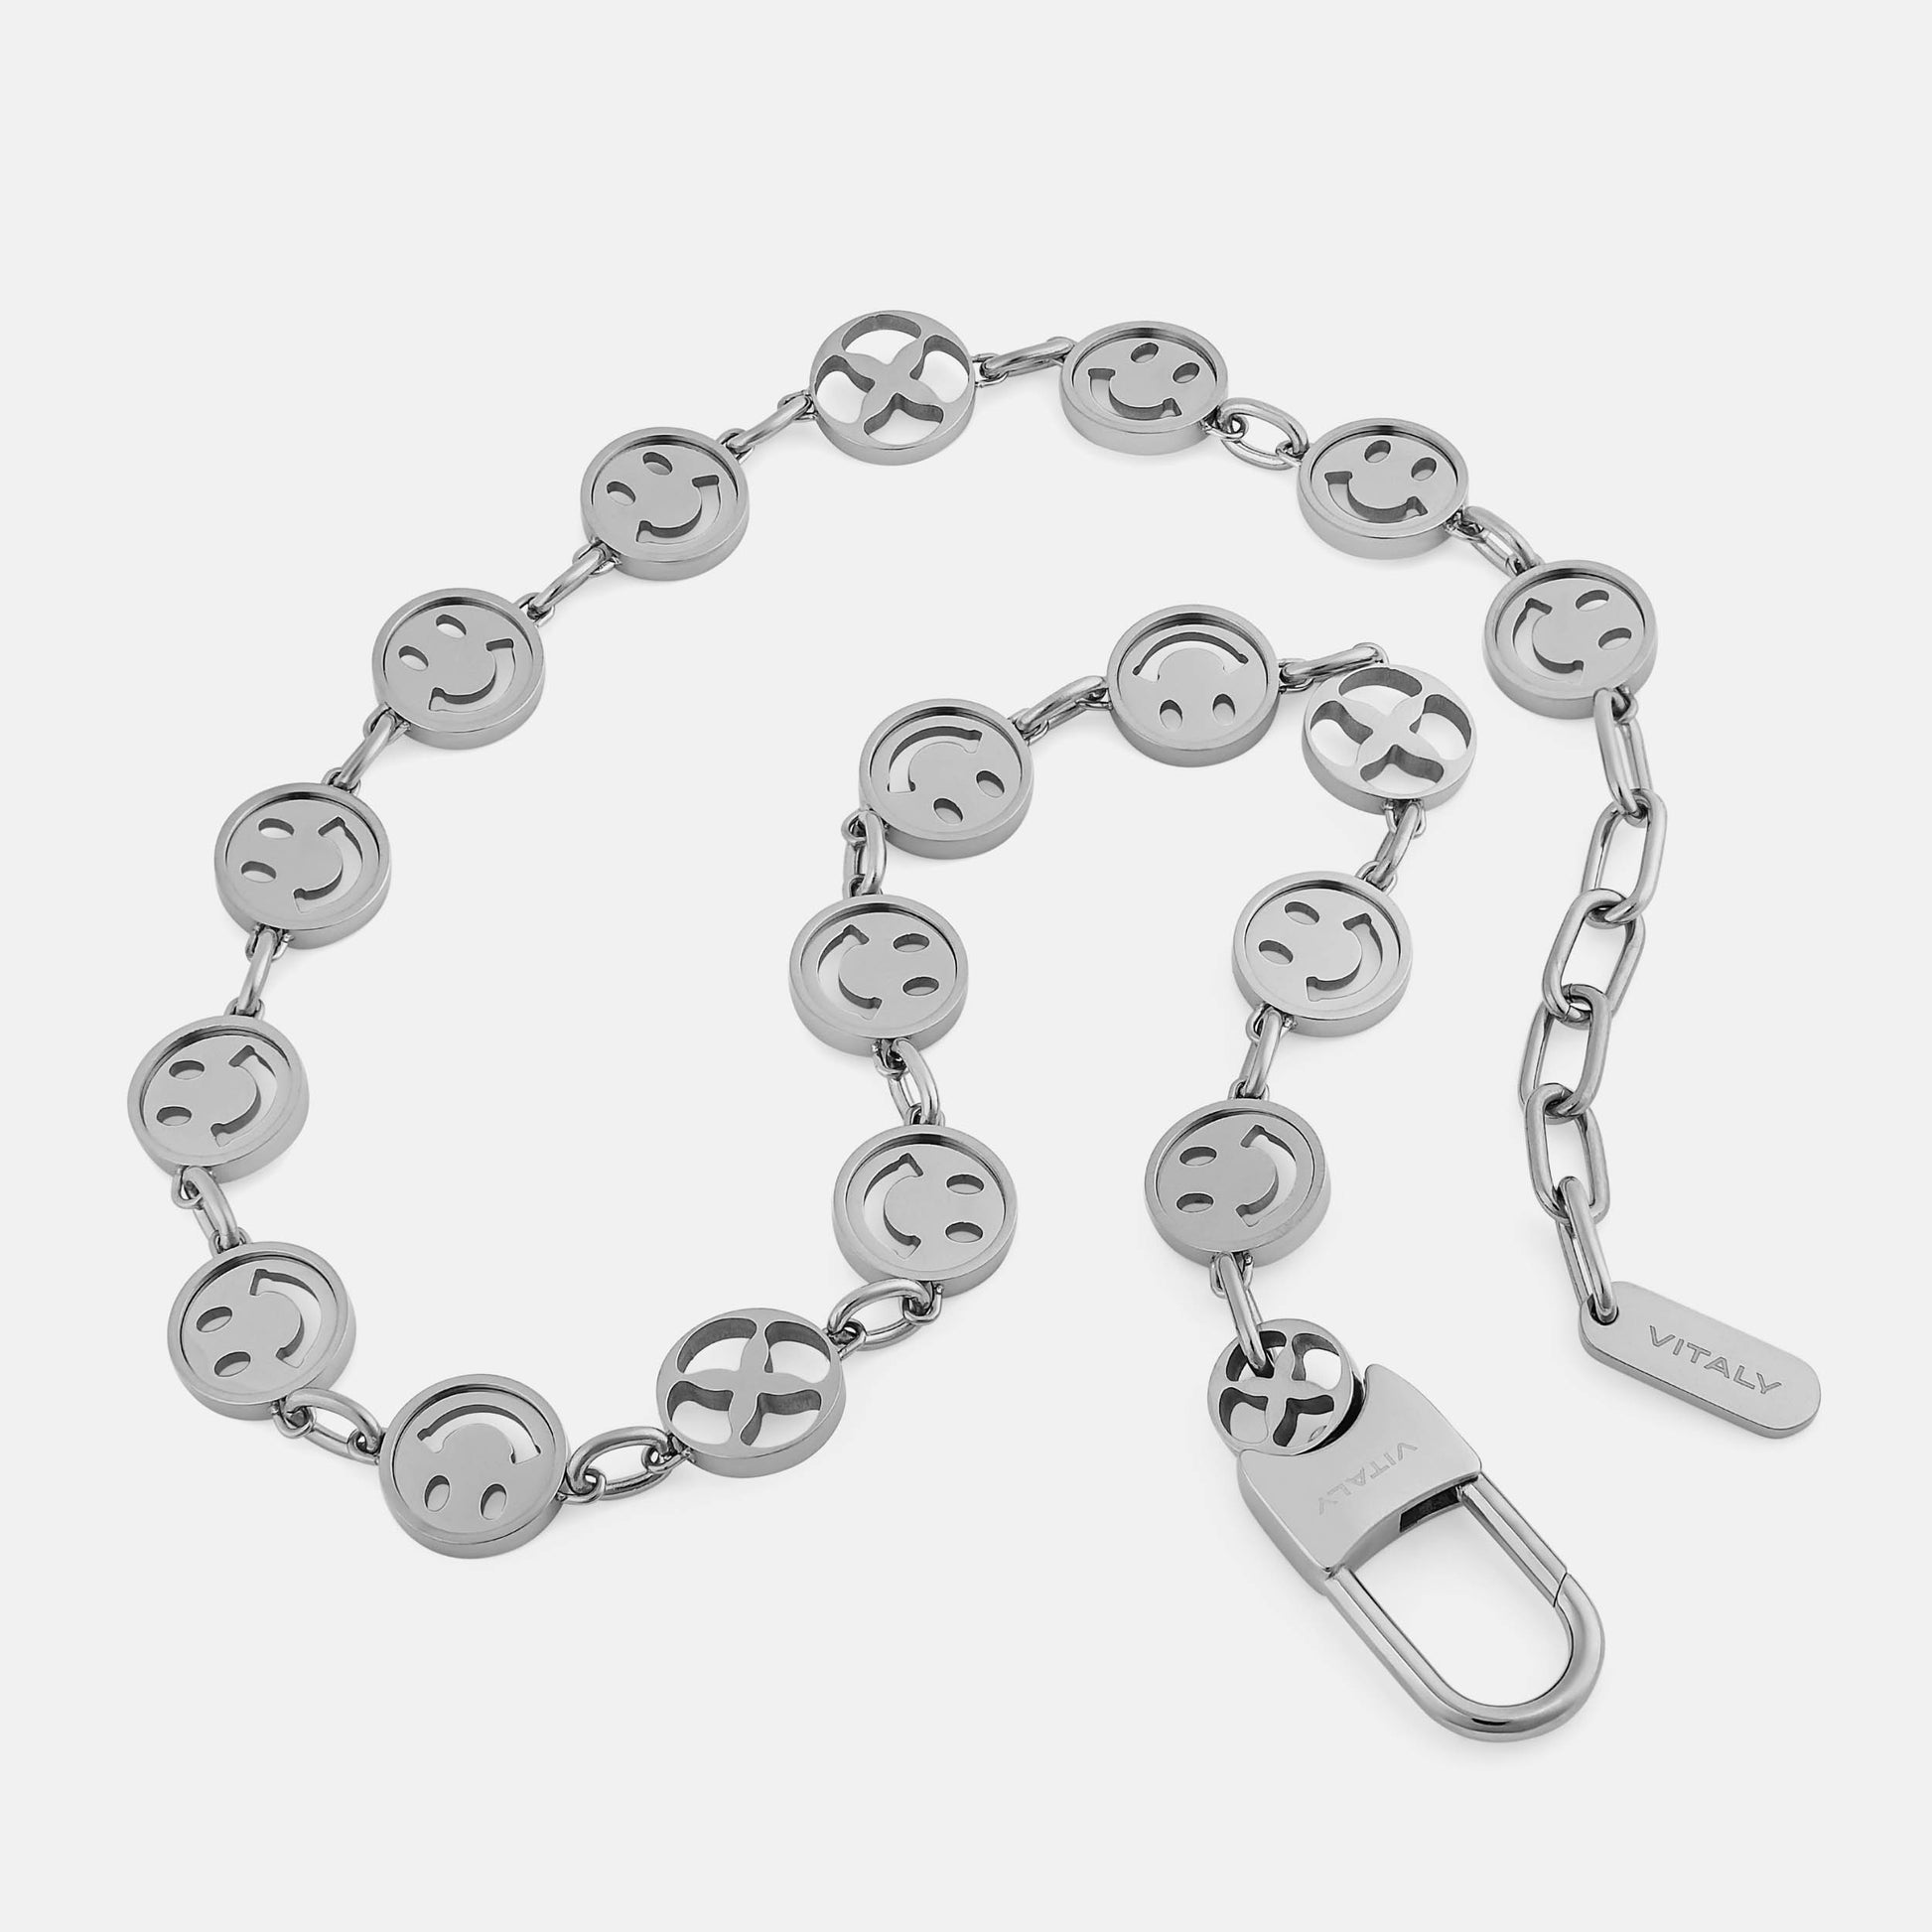 Vitaly Trespass Chain  100% Recycled Stainless Steel Accessories